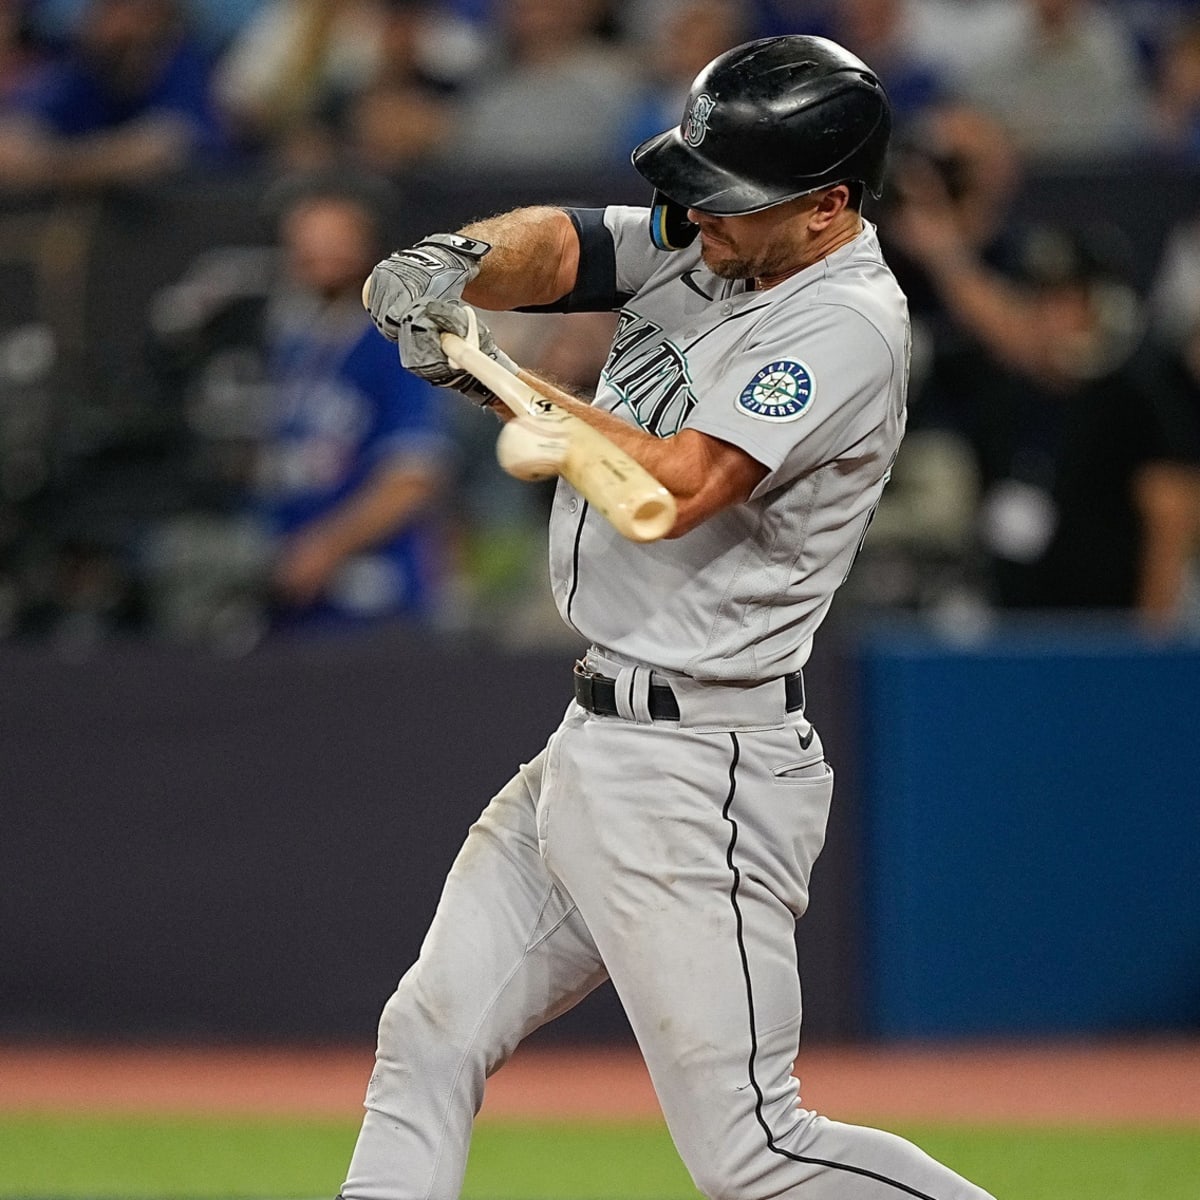 WATCH: Adam Frazier Hits Game-Winning Double to Send Mariners to